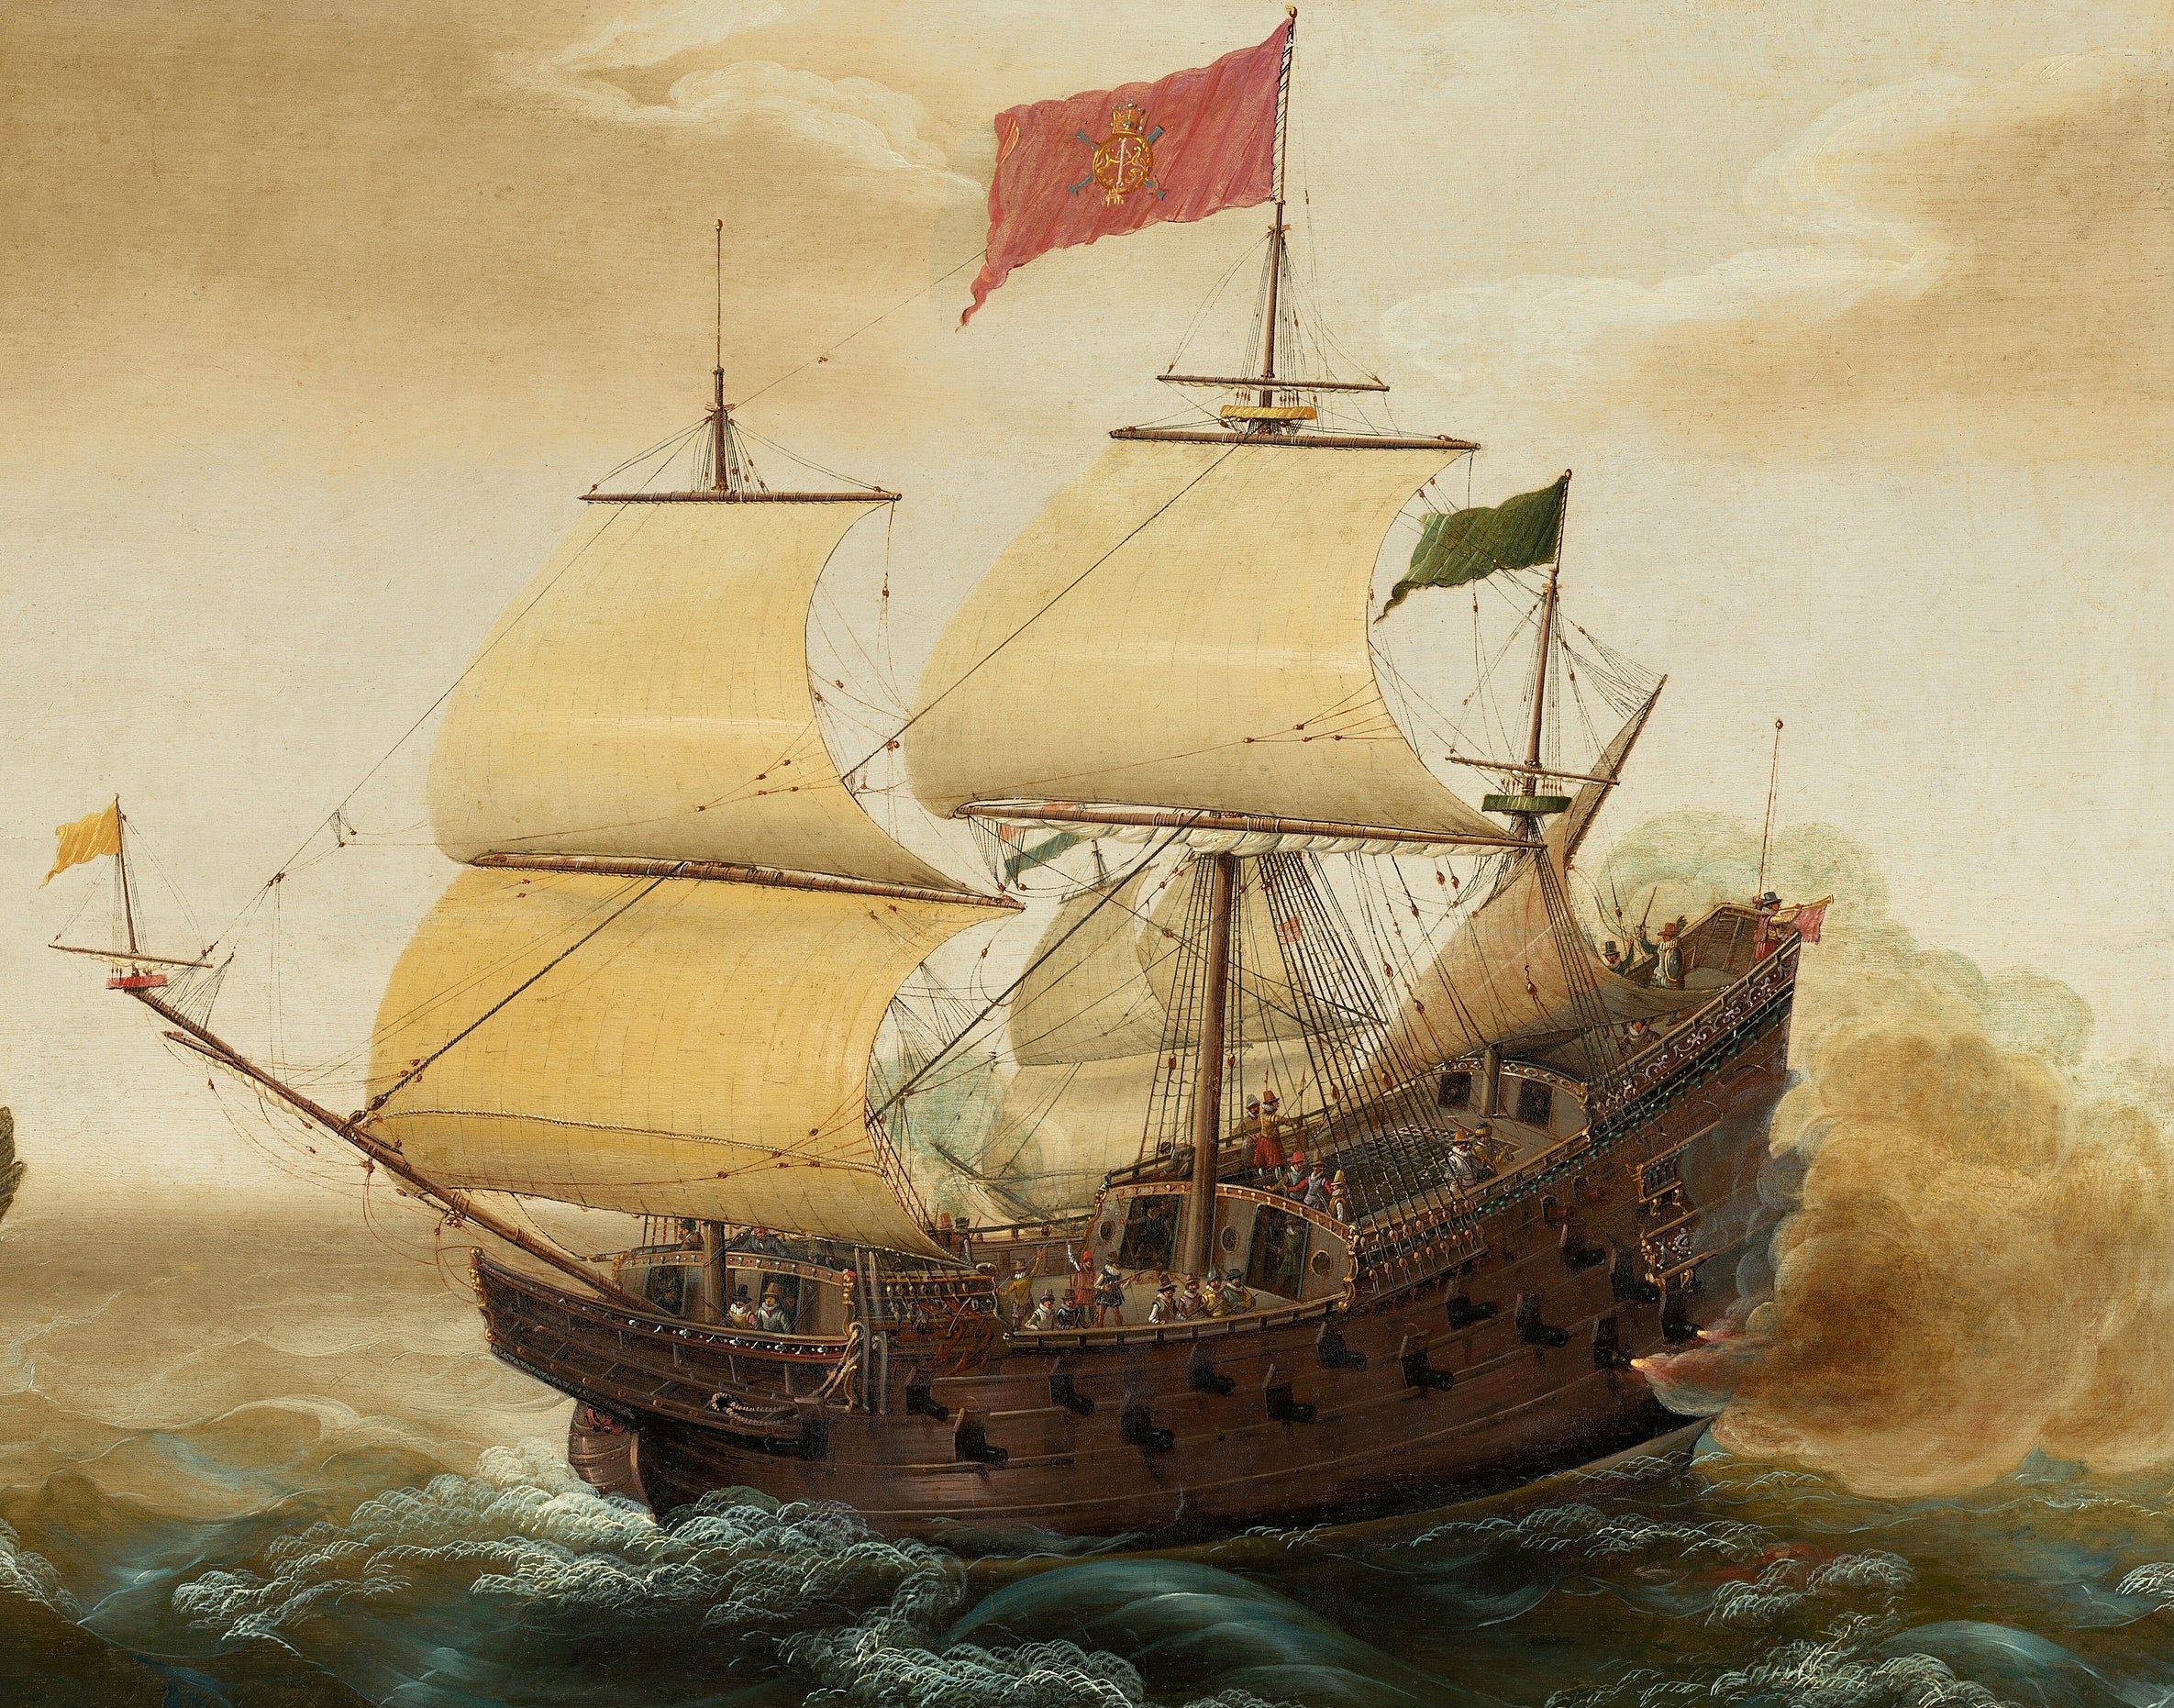 Spanish Galleon Firing its Cannon by Cornelis Verbeeck | Buy Maritime  Prints Online – Historical Maritime